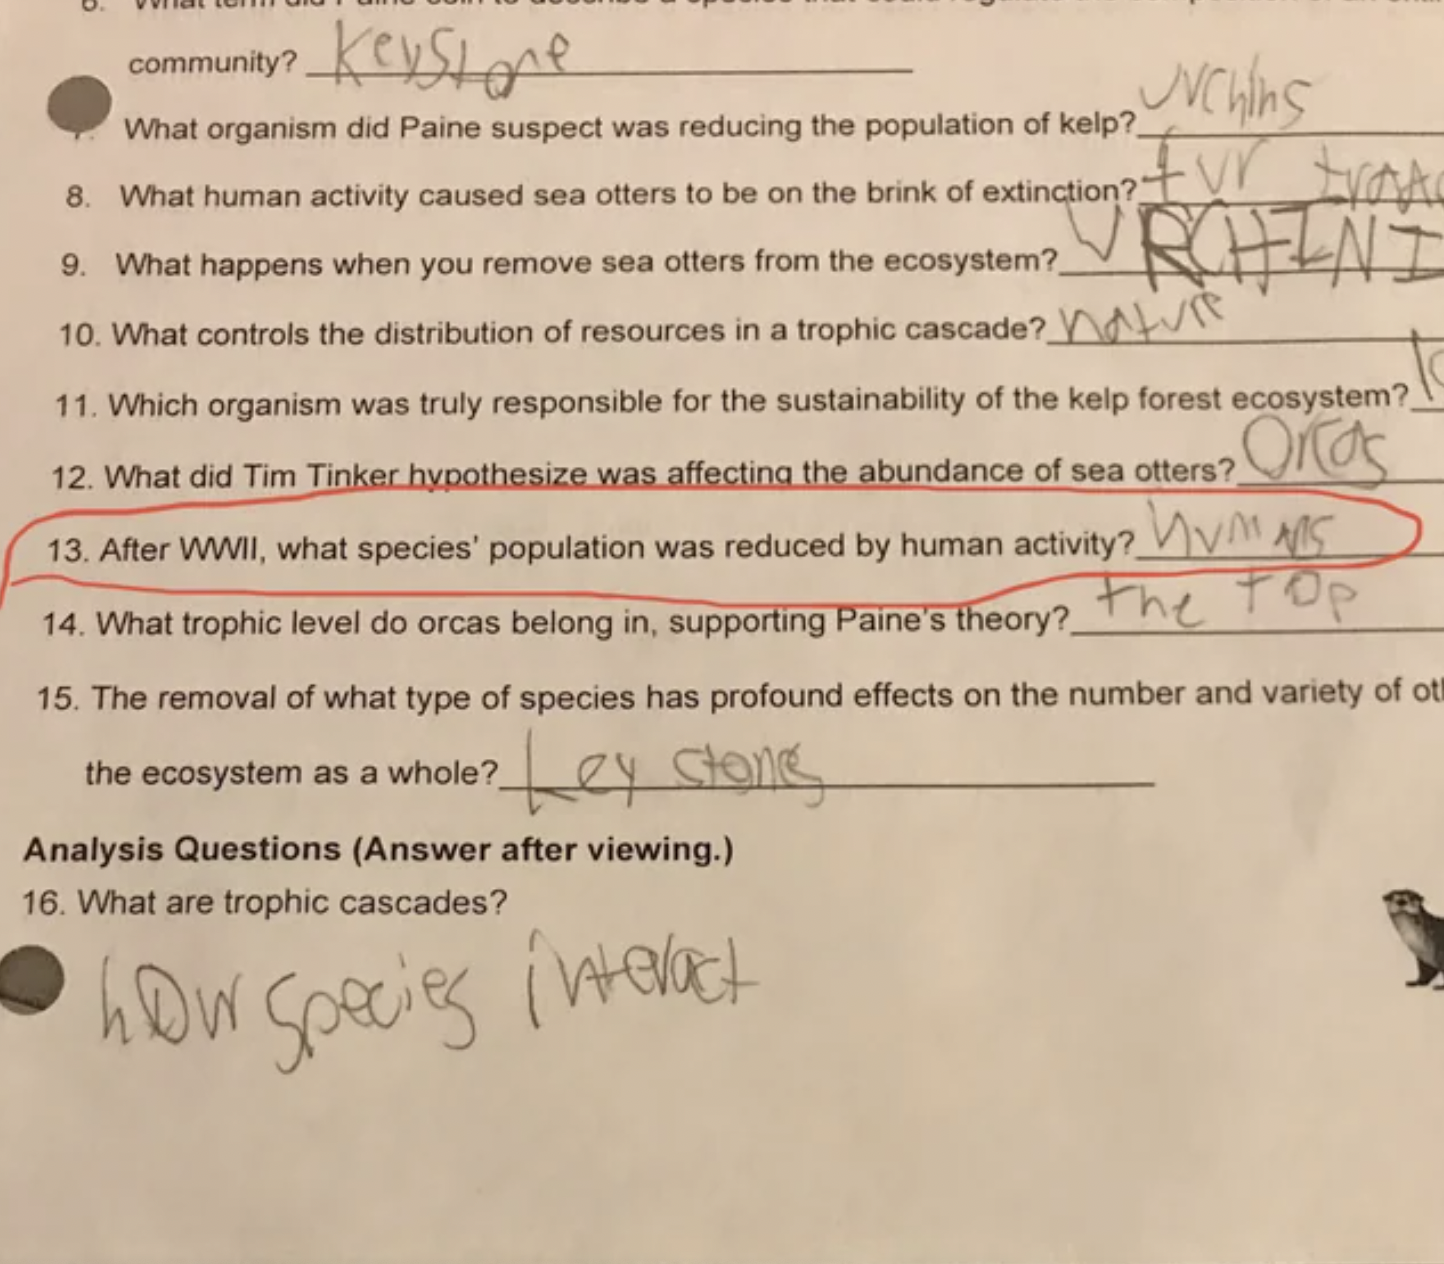 facepalms and fails - handwriting - Keystone What organism did Paine suspect was reducing the population of kelp? 8. What human activity caused sea otters to be on the brink of extinction?" 9. What happens when you remove sea otters from the ecosystem? 10